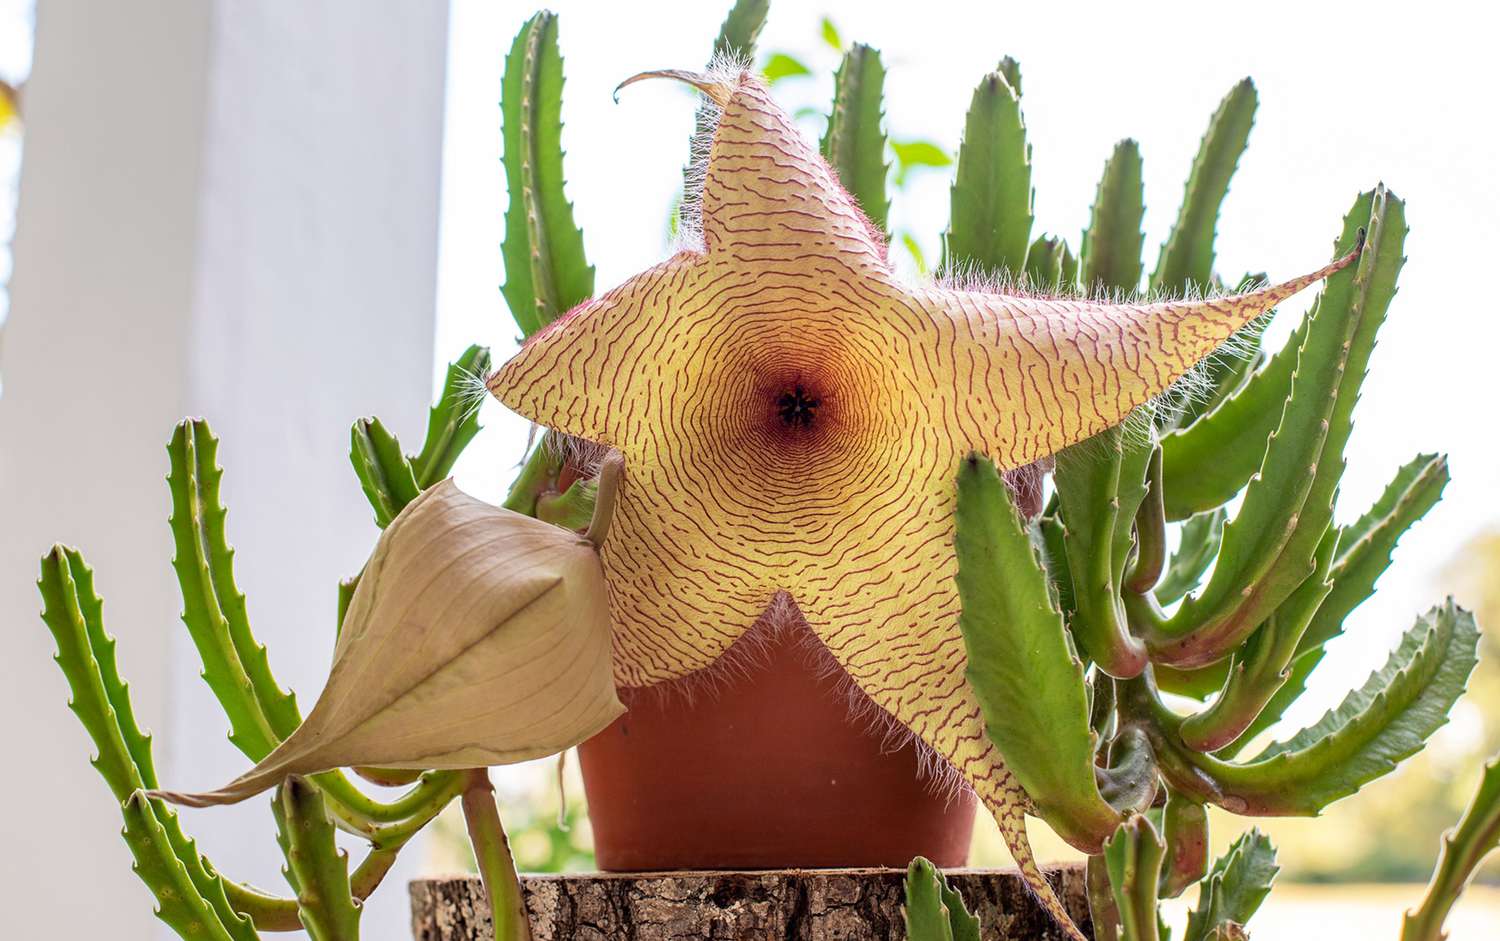 stapelia gigantea or toad plant in a pot